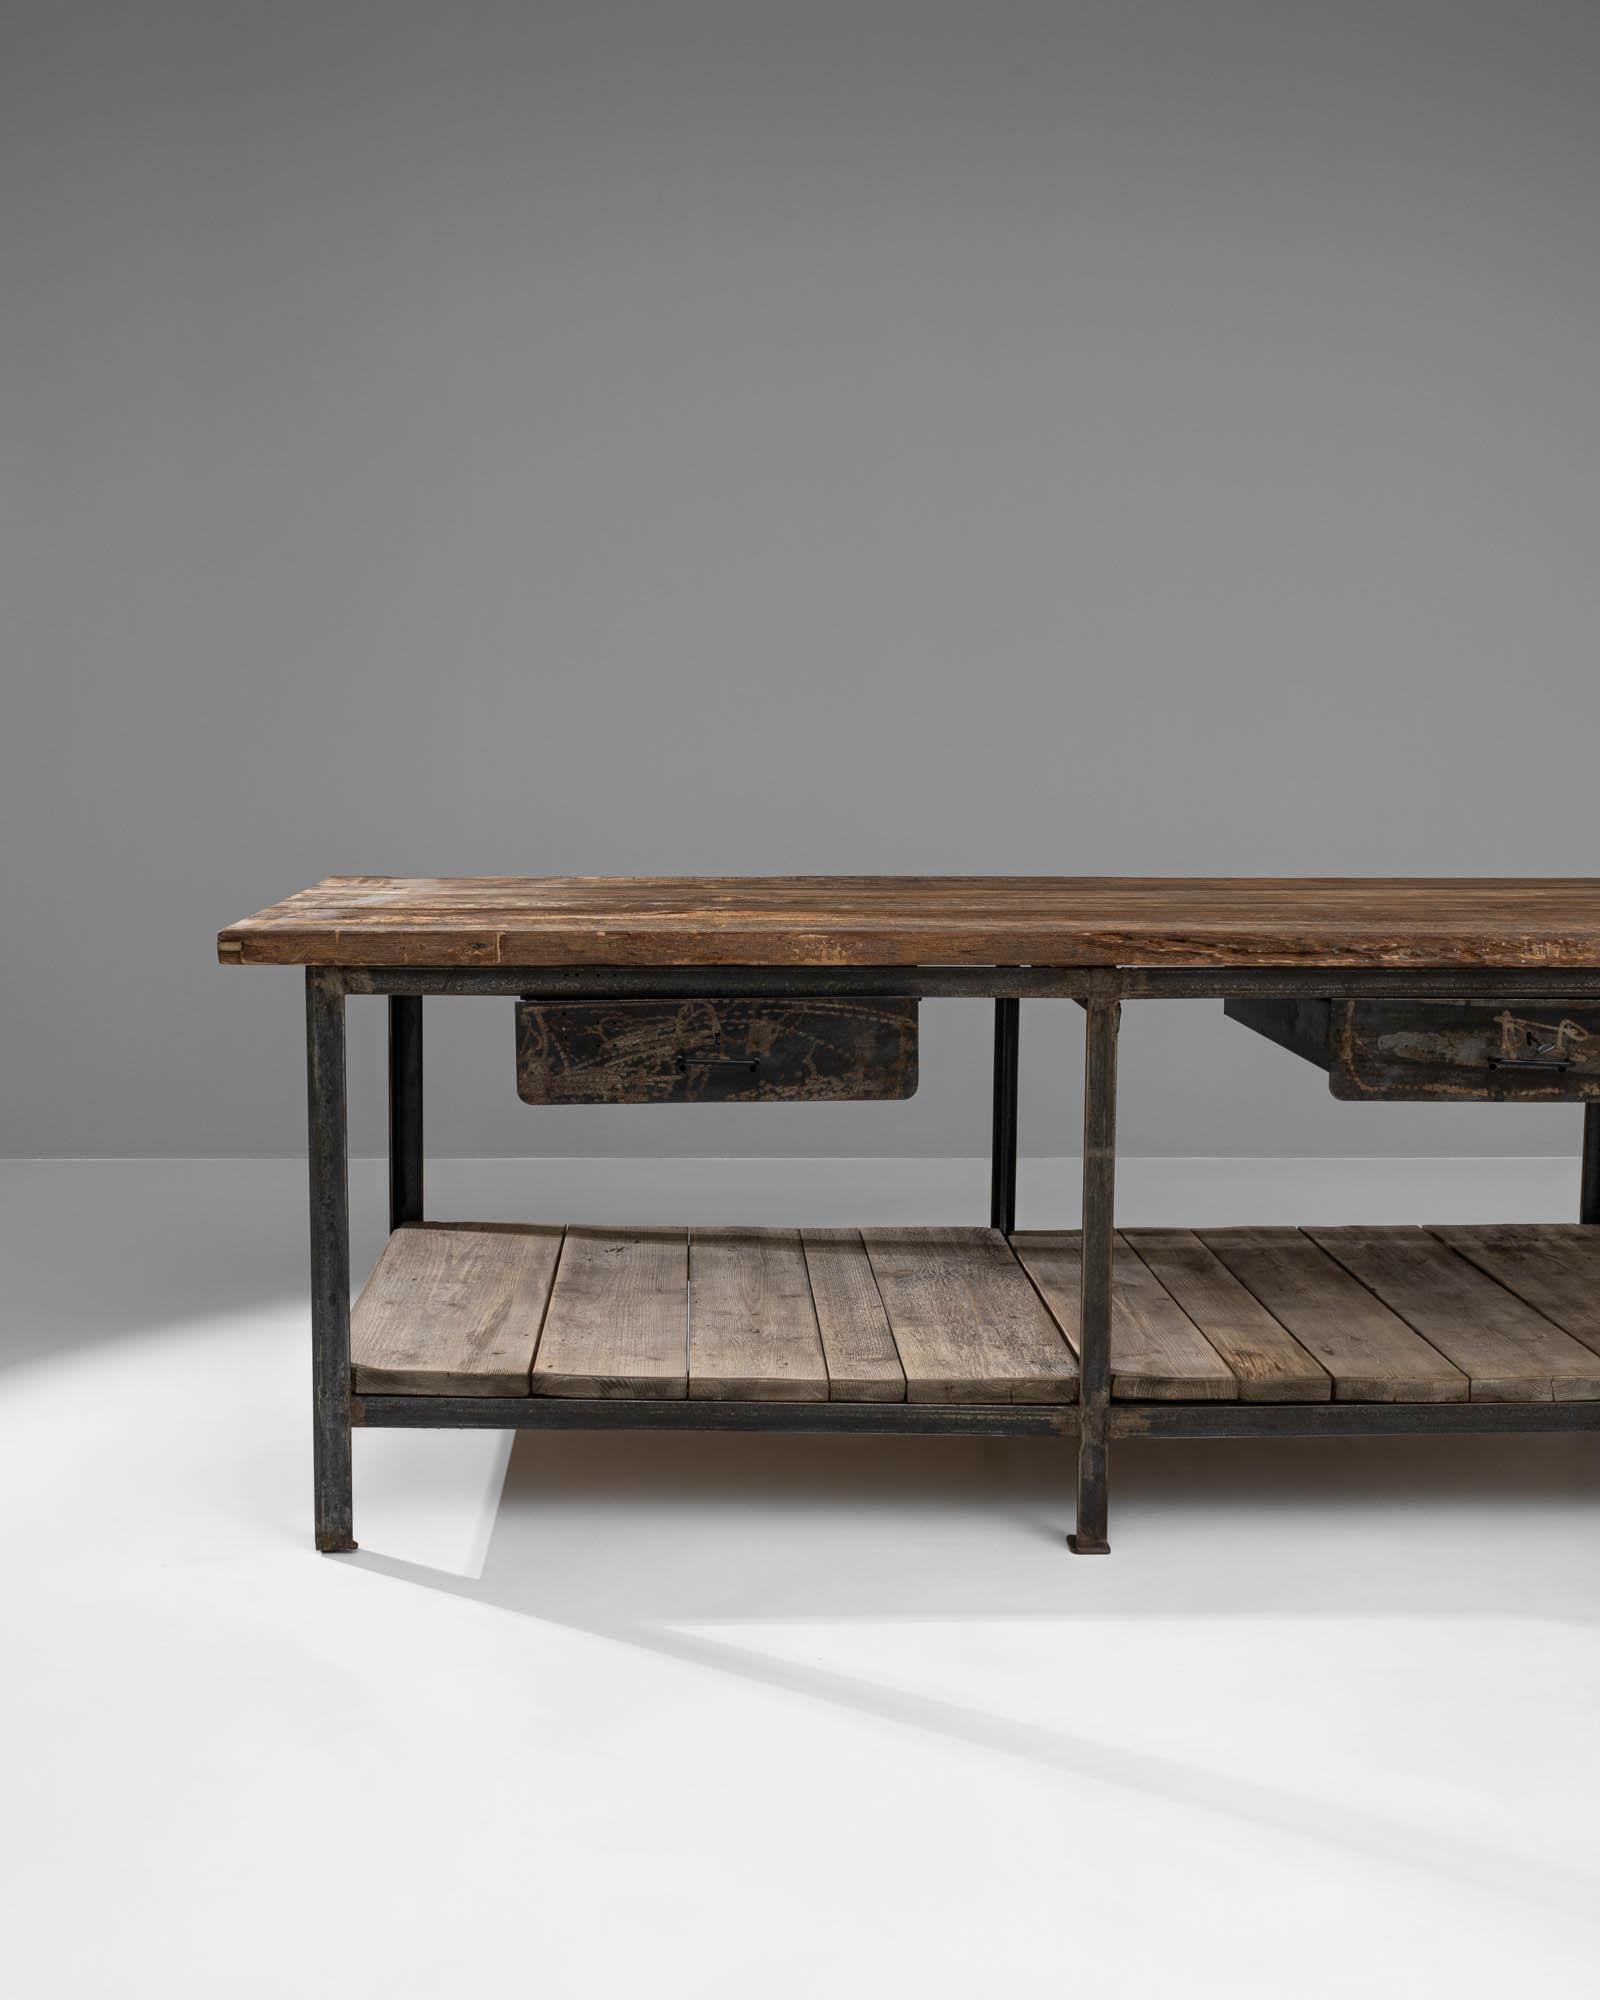 This 20th Century French Industrial Table is a magnificent find for lovers of unique and functional vintage furniture. It features a robust, rectangular top crafted from weathered wood that adds a deep, rich character to the piece. Supported by a